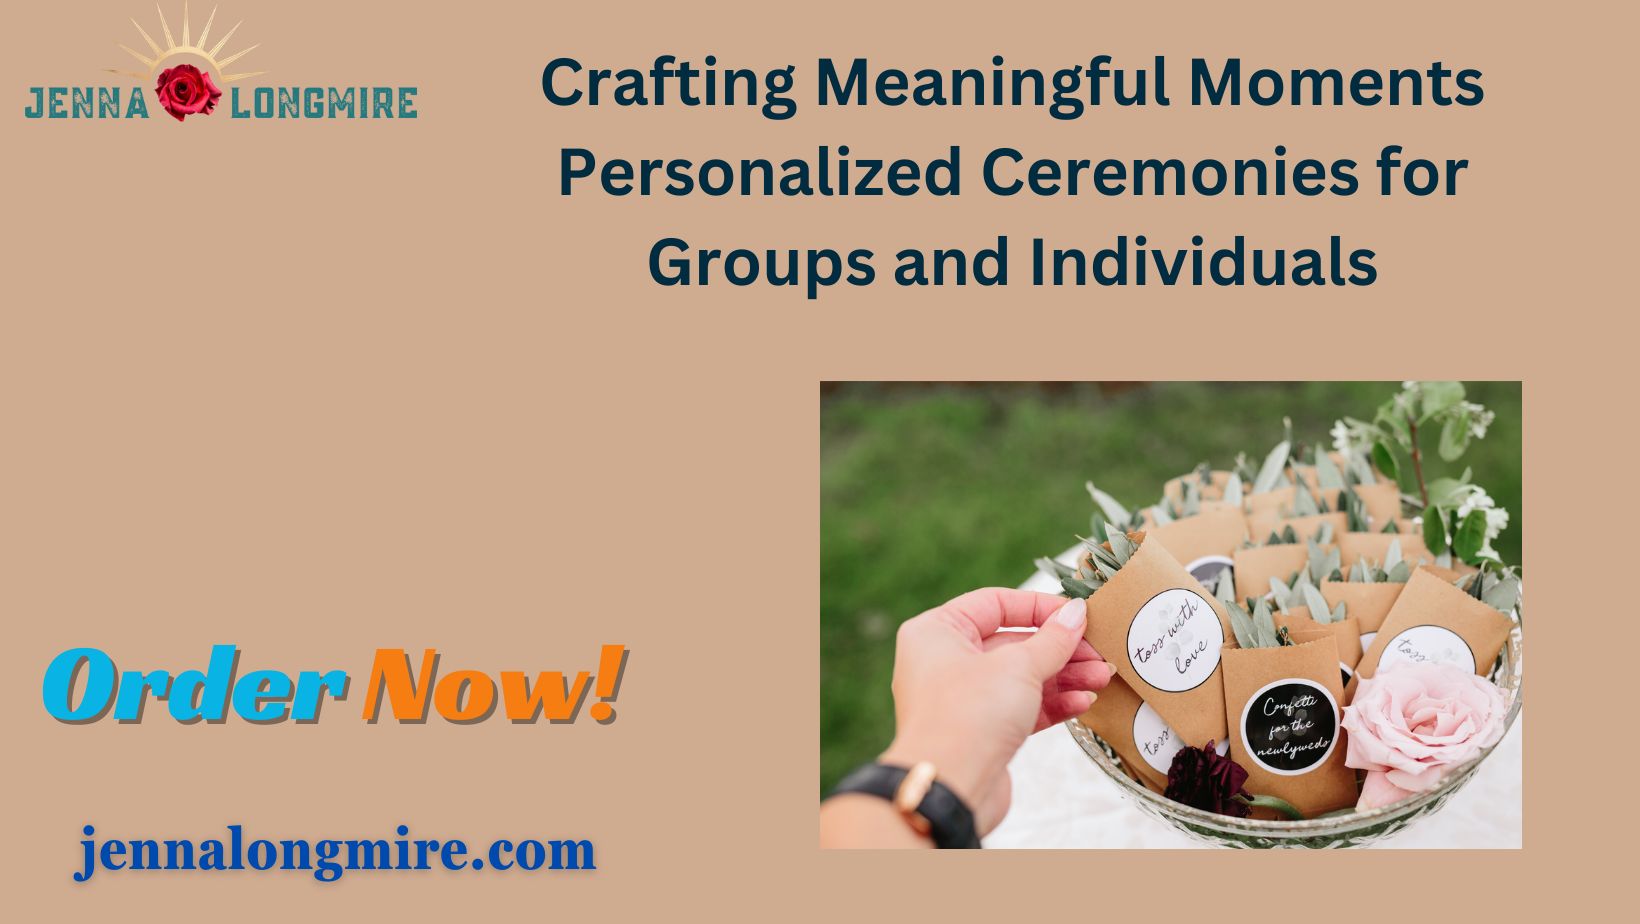 Personalized Ceremonies for Groups and Individuals